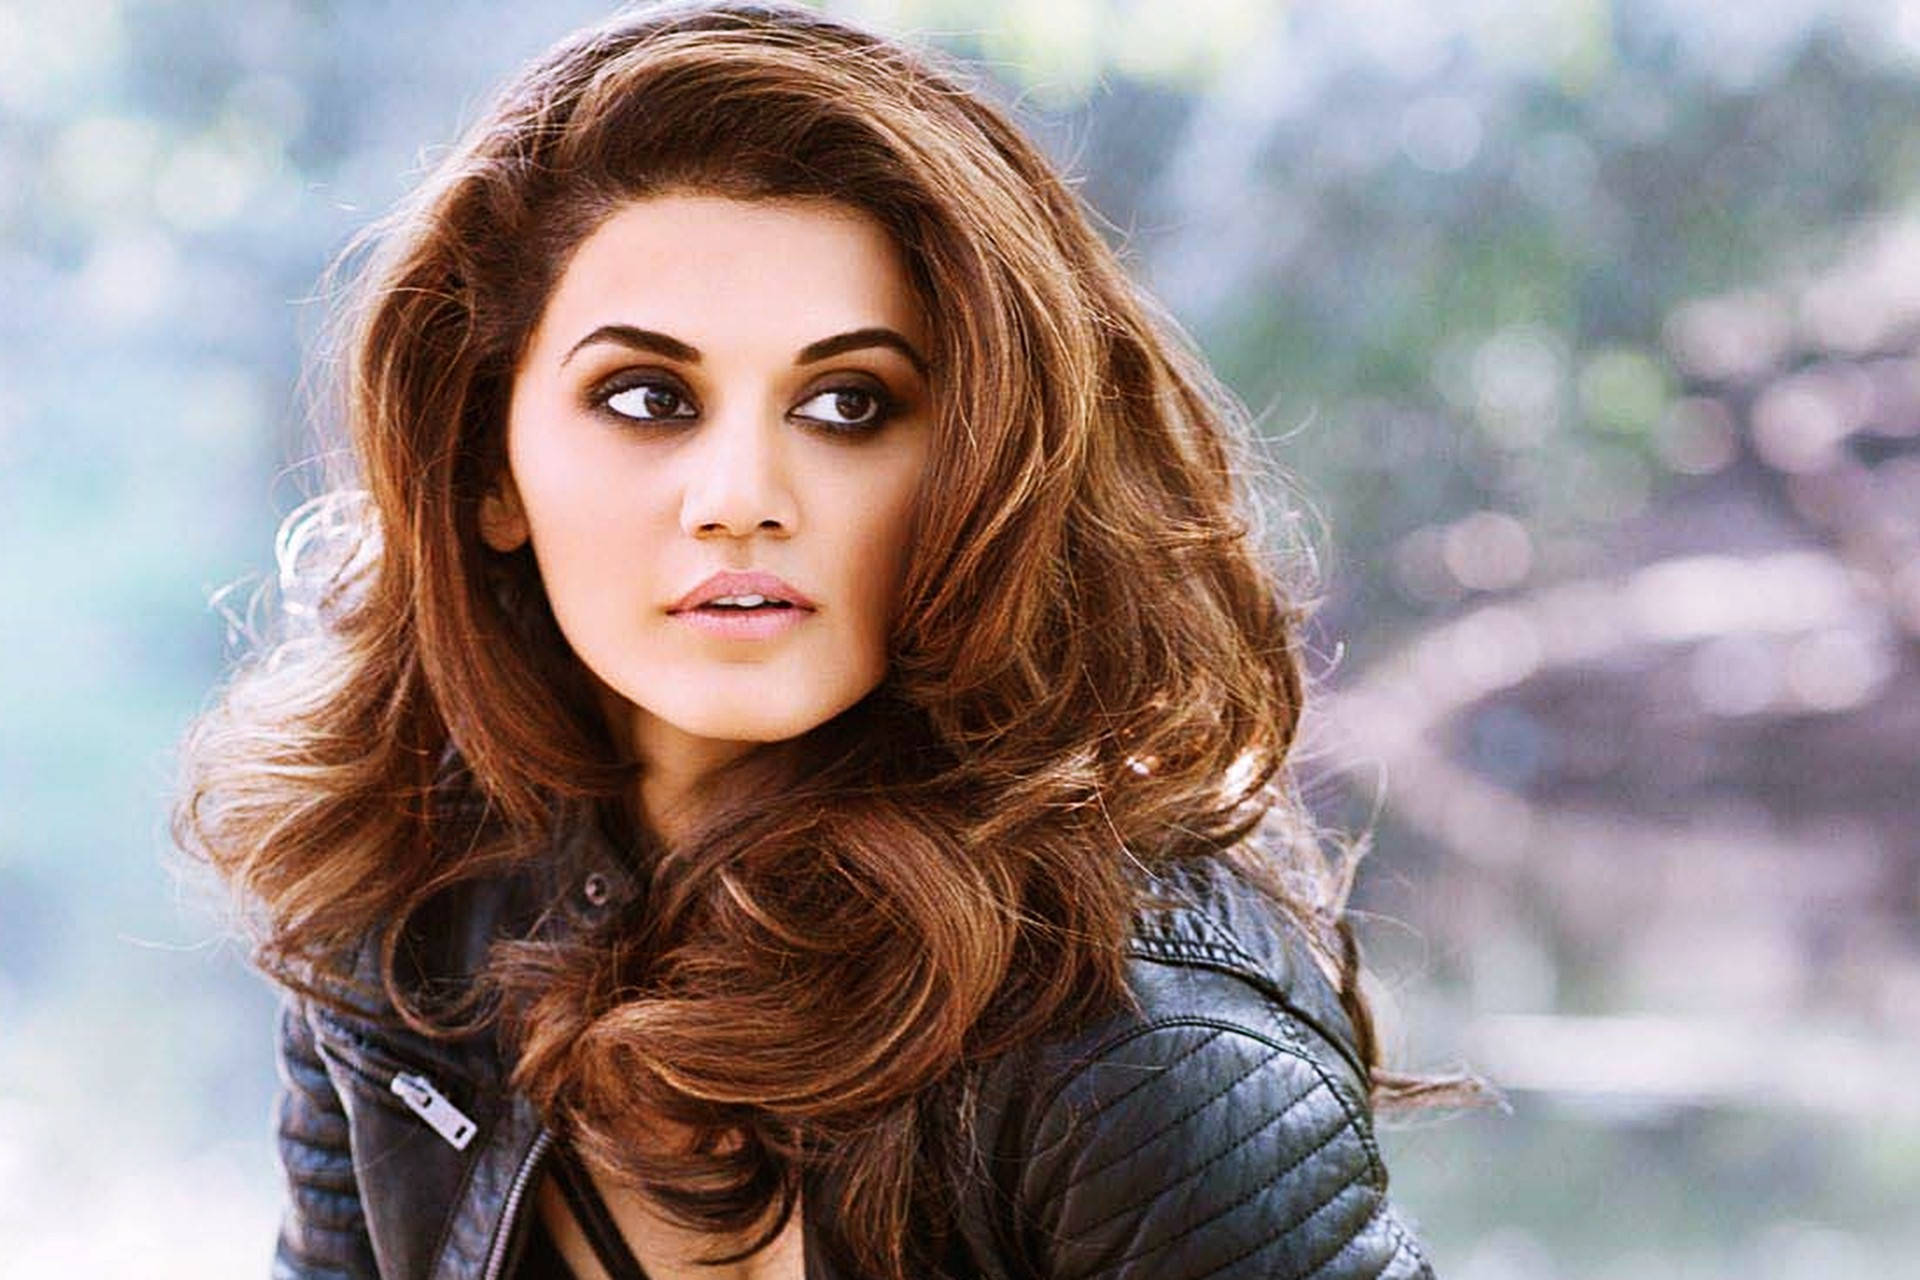 Taapsee Pannu Styling Leather Jacket in Vogue Wallpaper